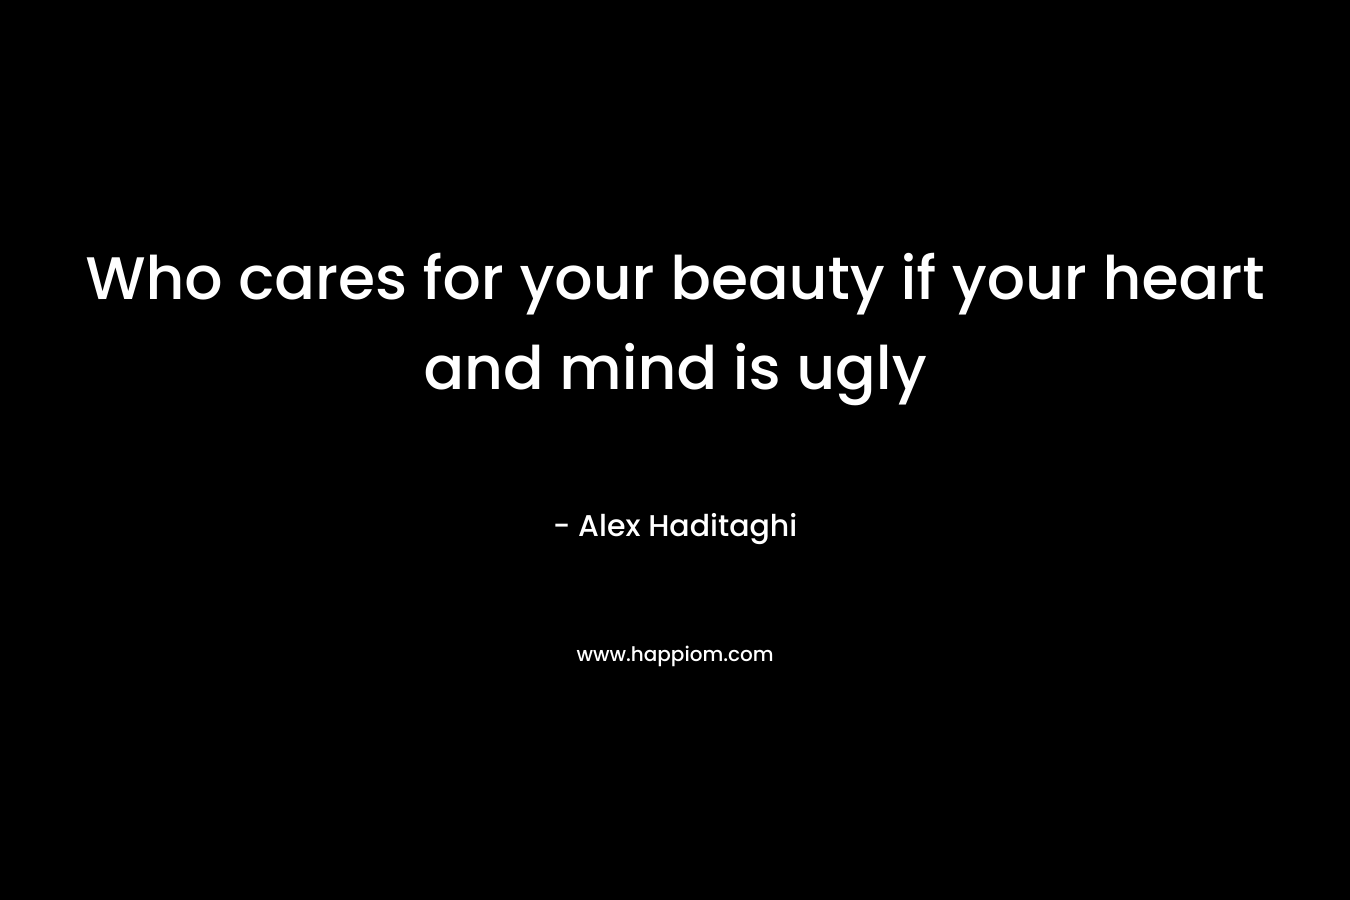 Who cares for your beauty if your heart and mind is ugly